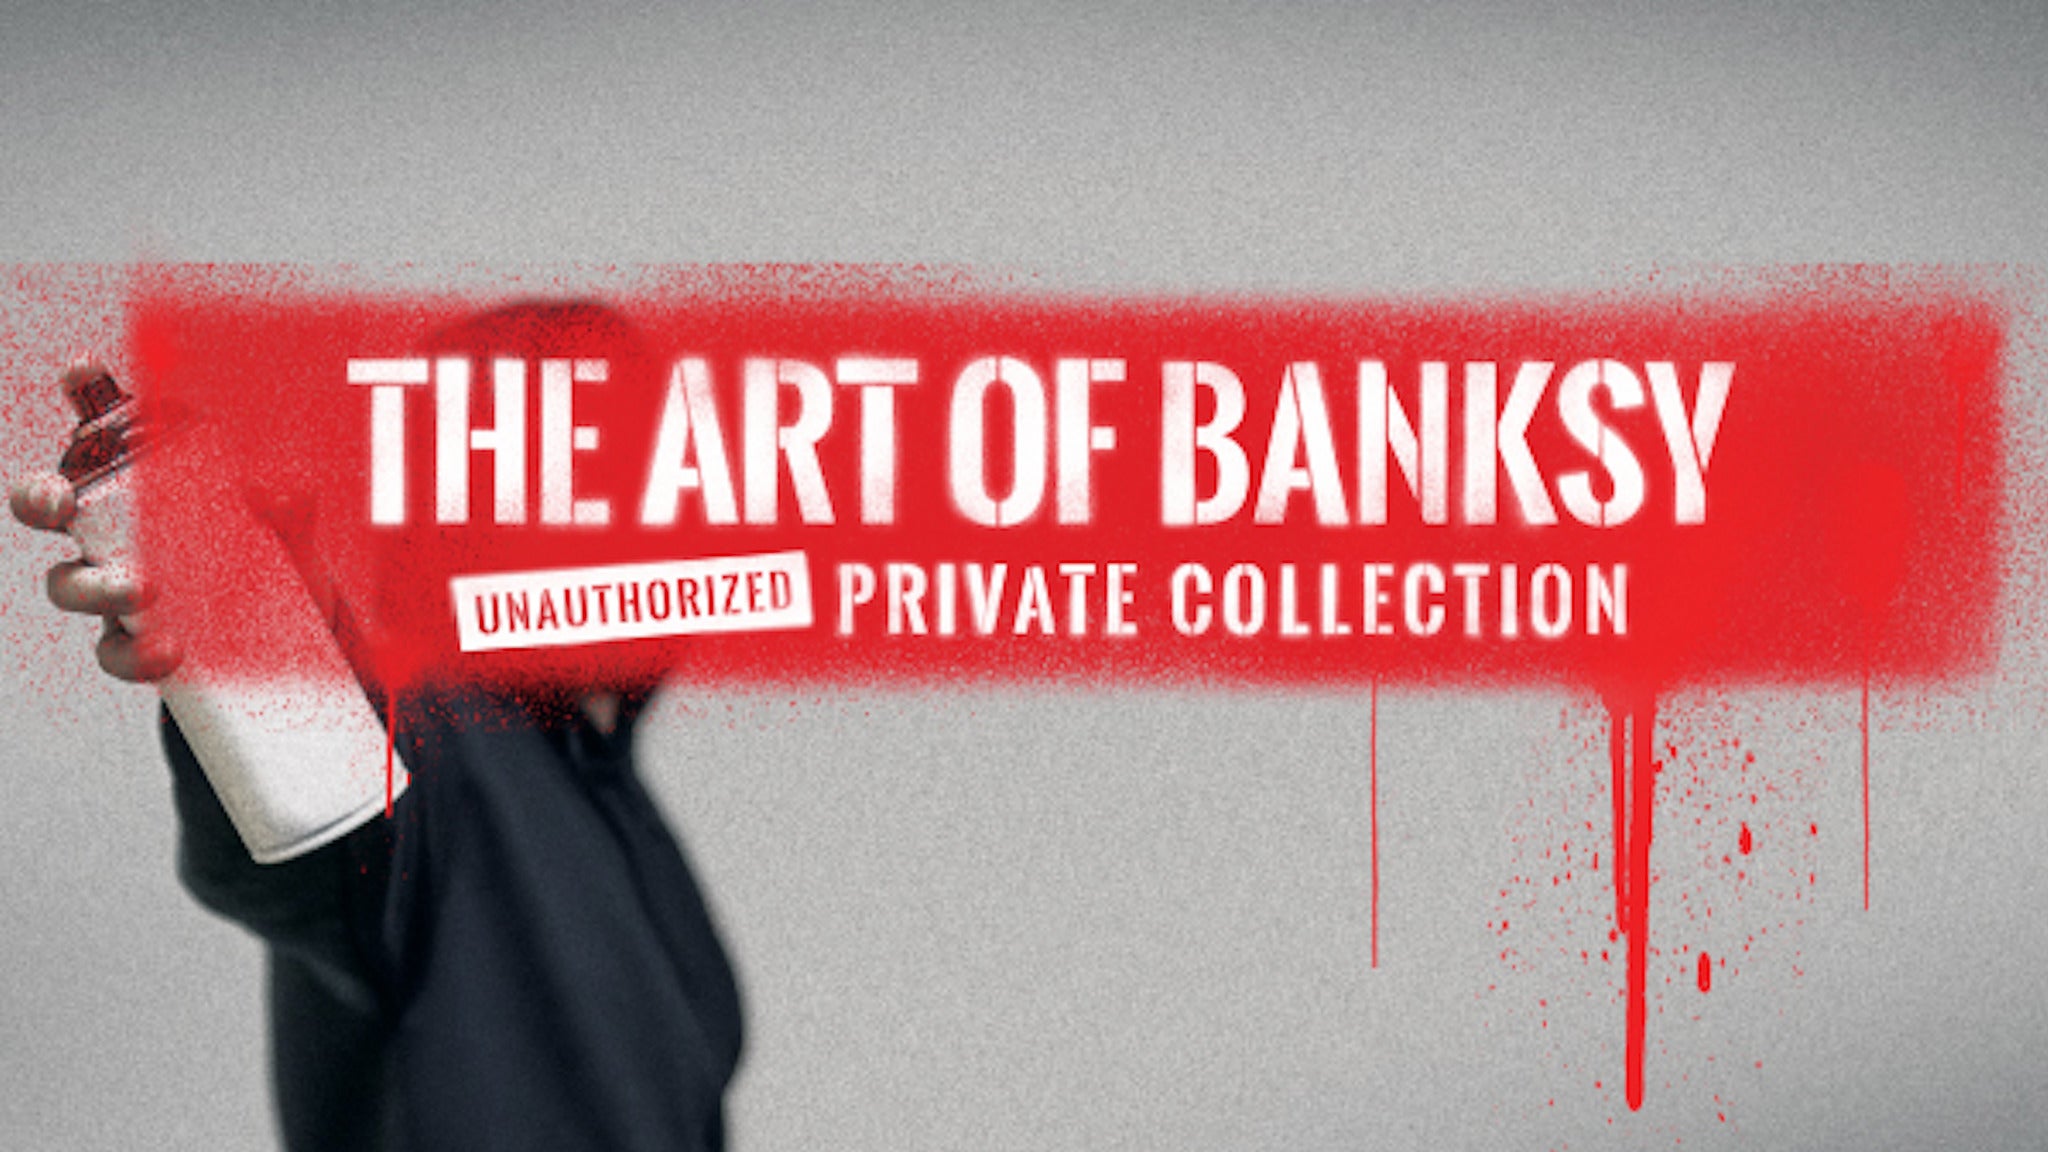 The Art of Banksy - Washington at Gallery Place